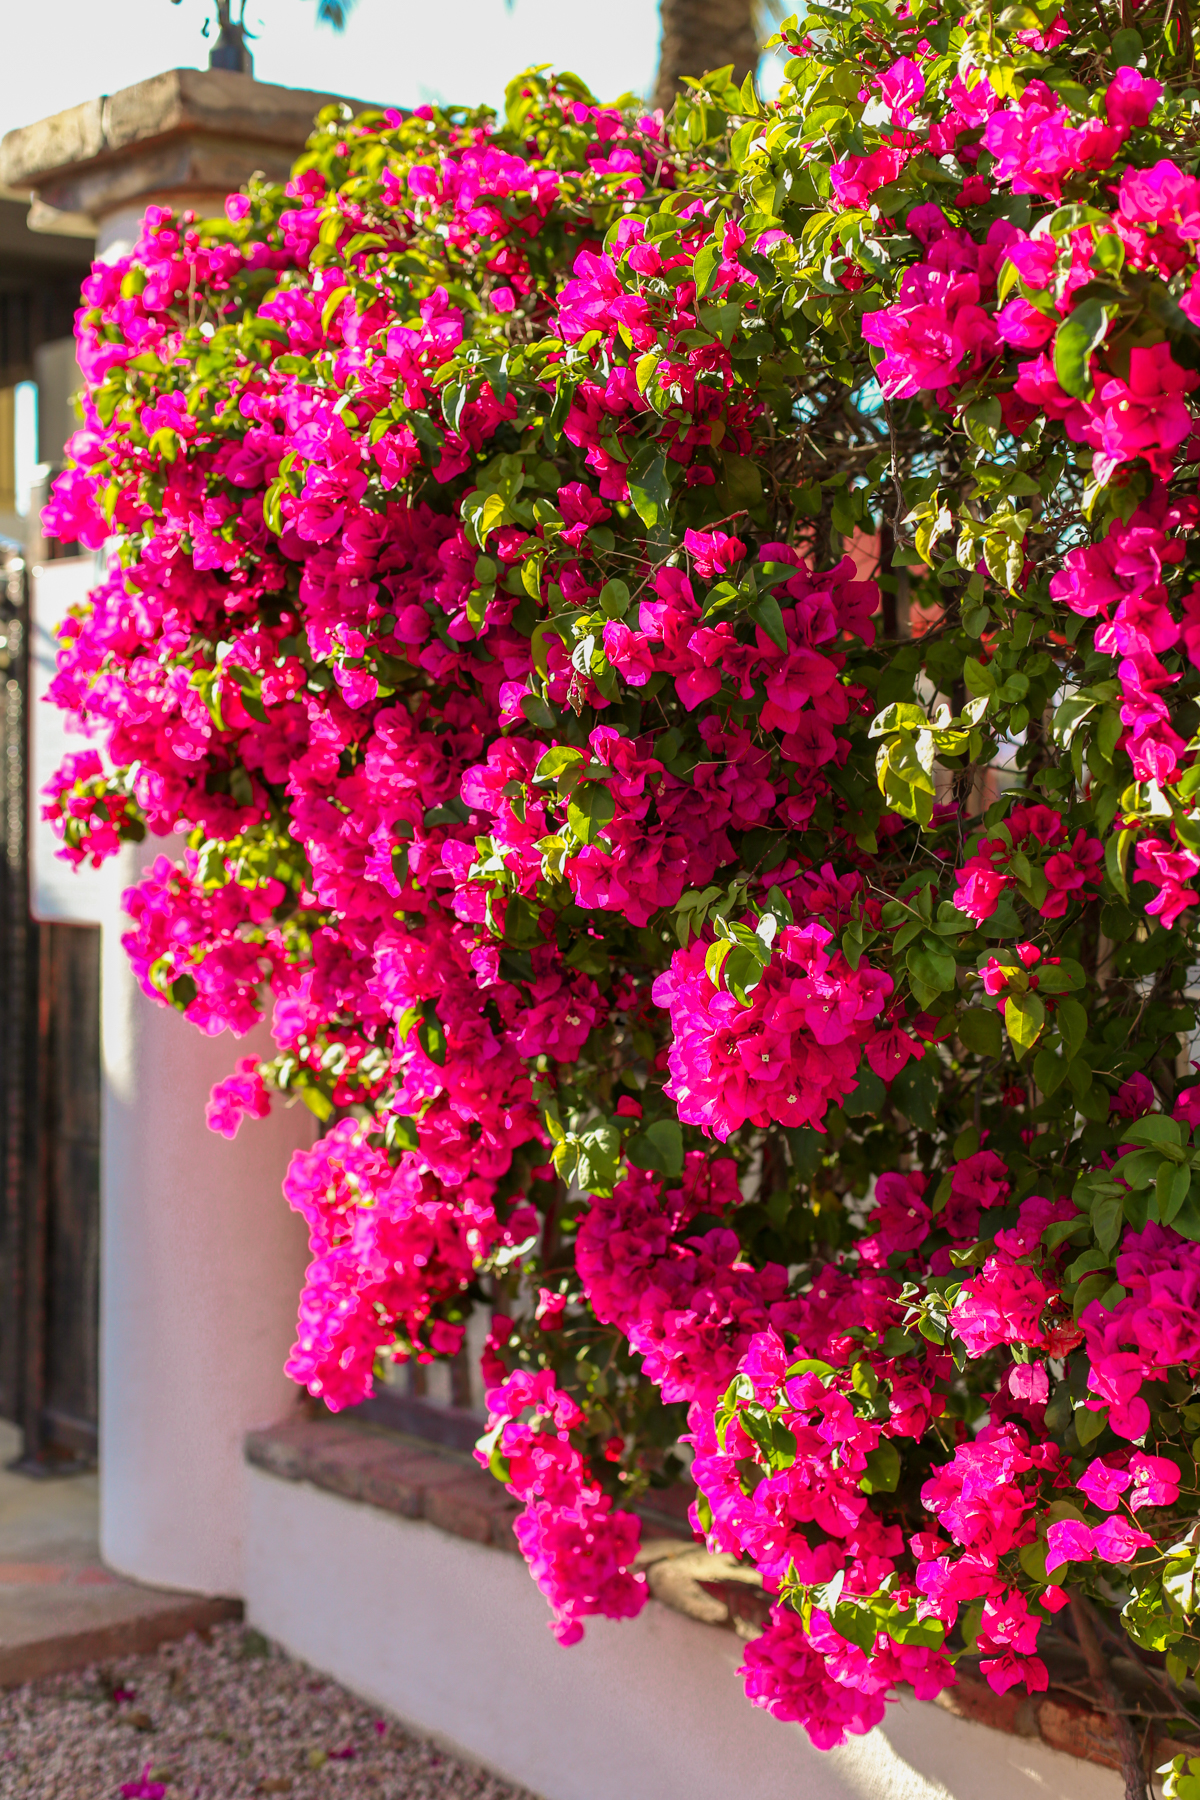 Bougainvillea growing on a white adobe wall